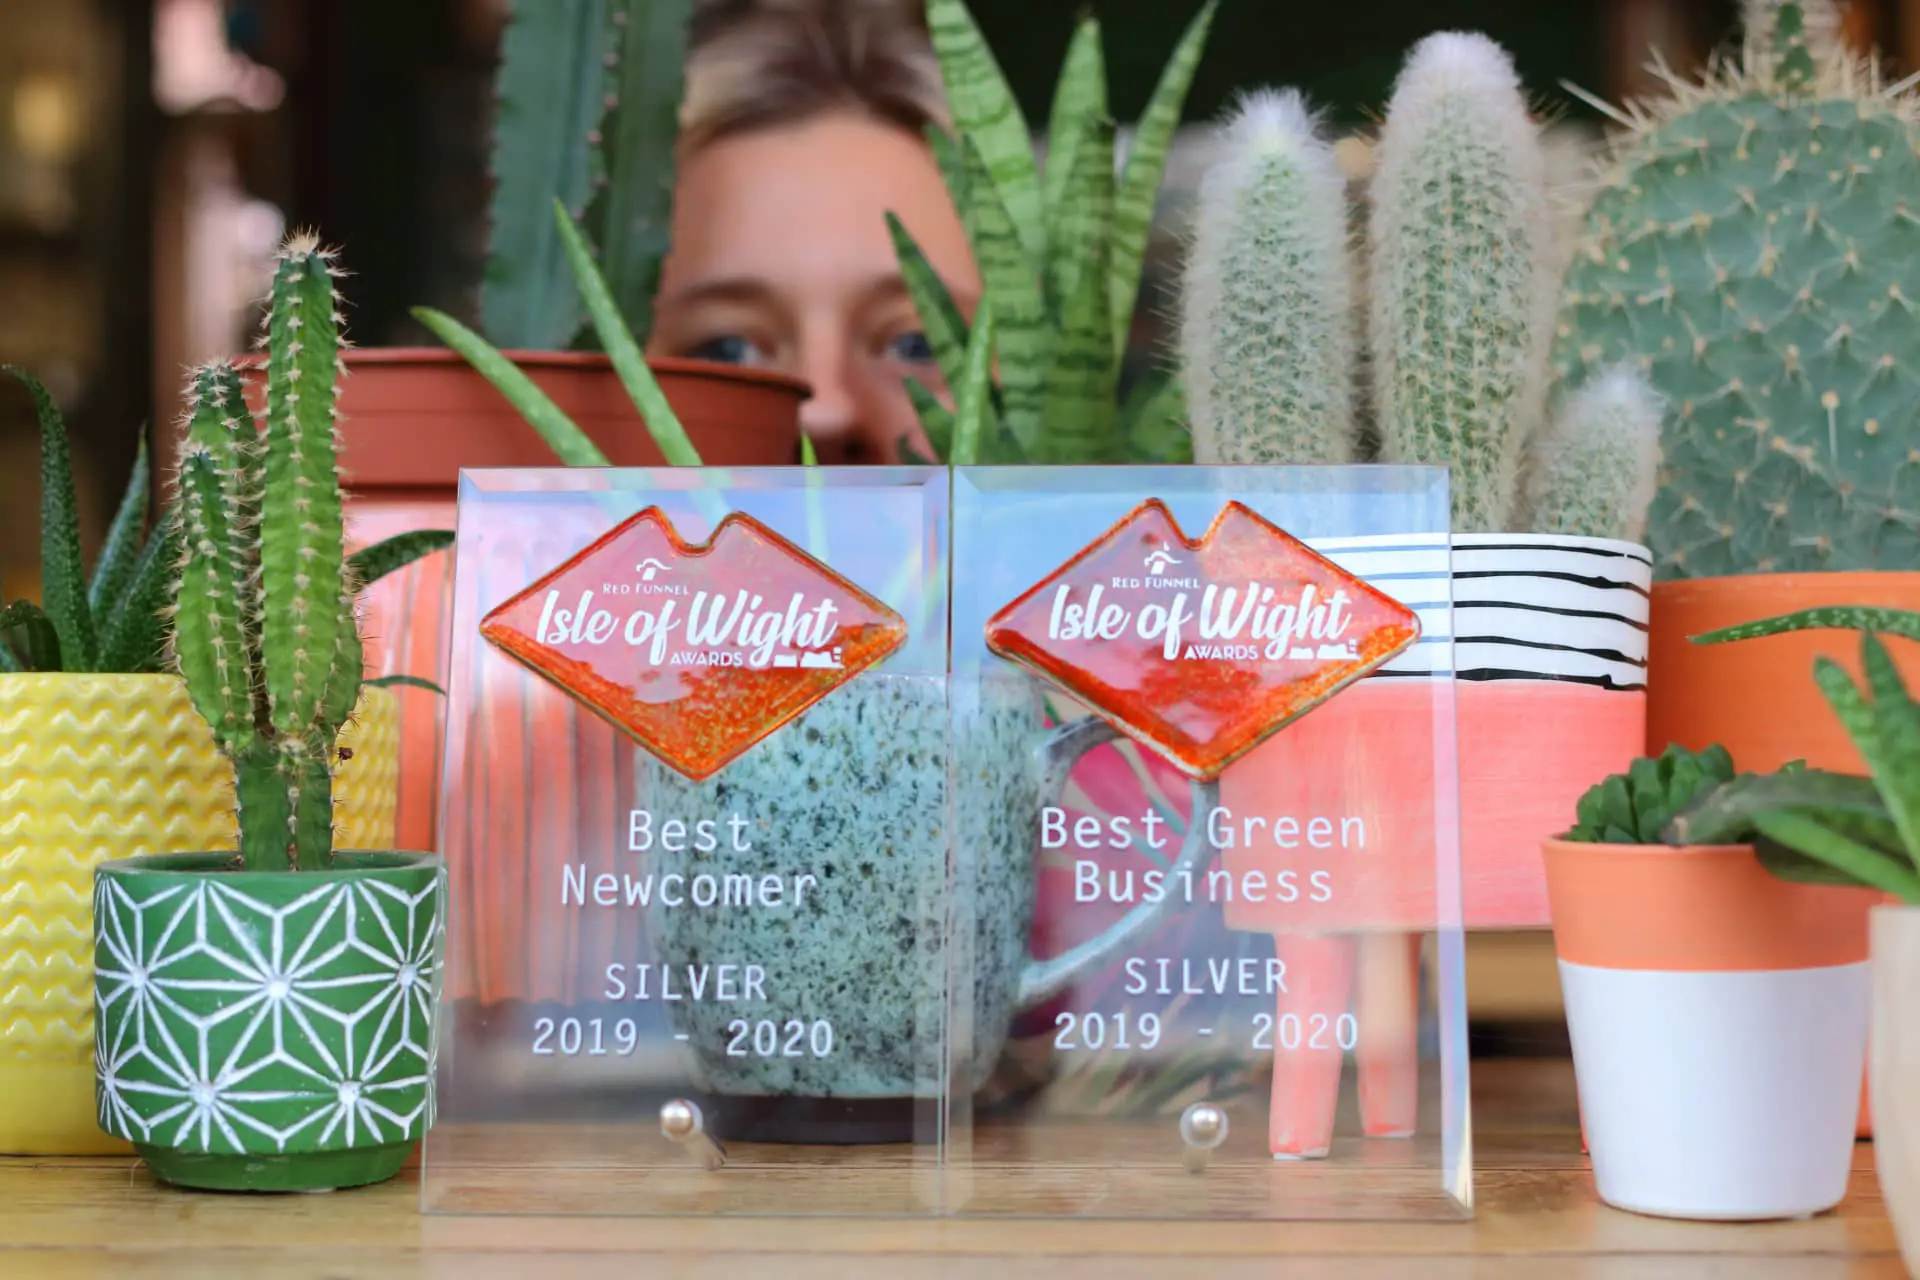 Steph peeping through plants after Peach wins Zero Waste Food Store -